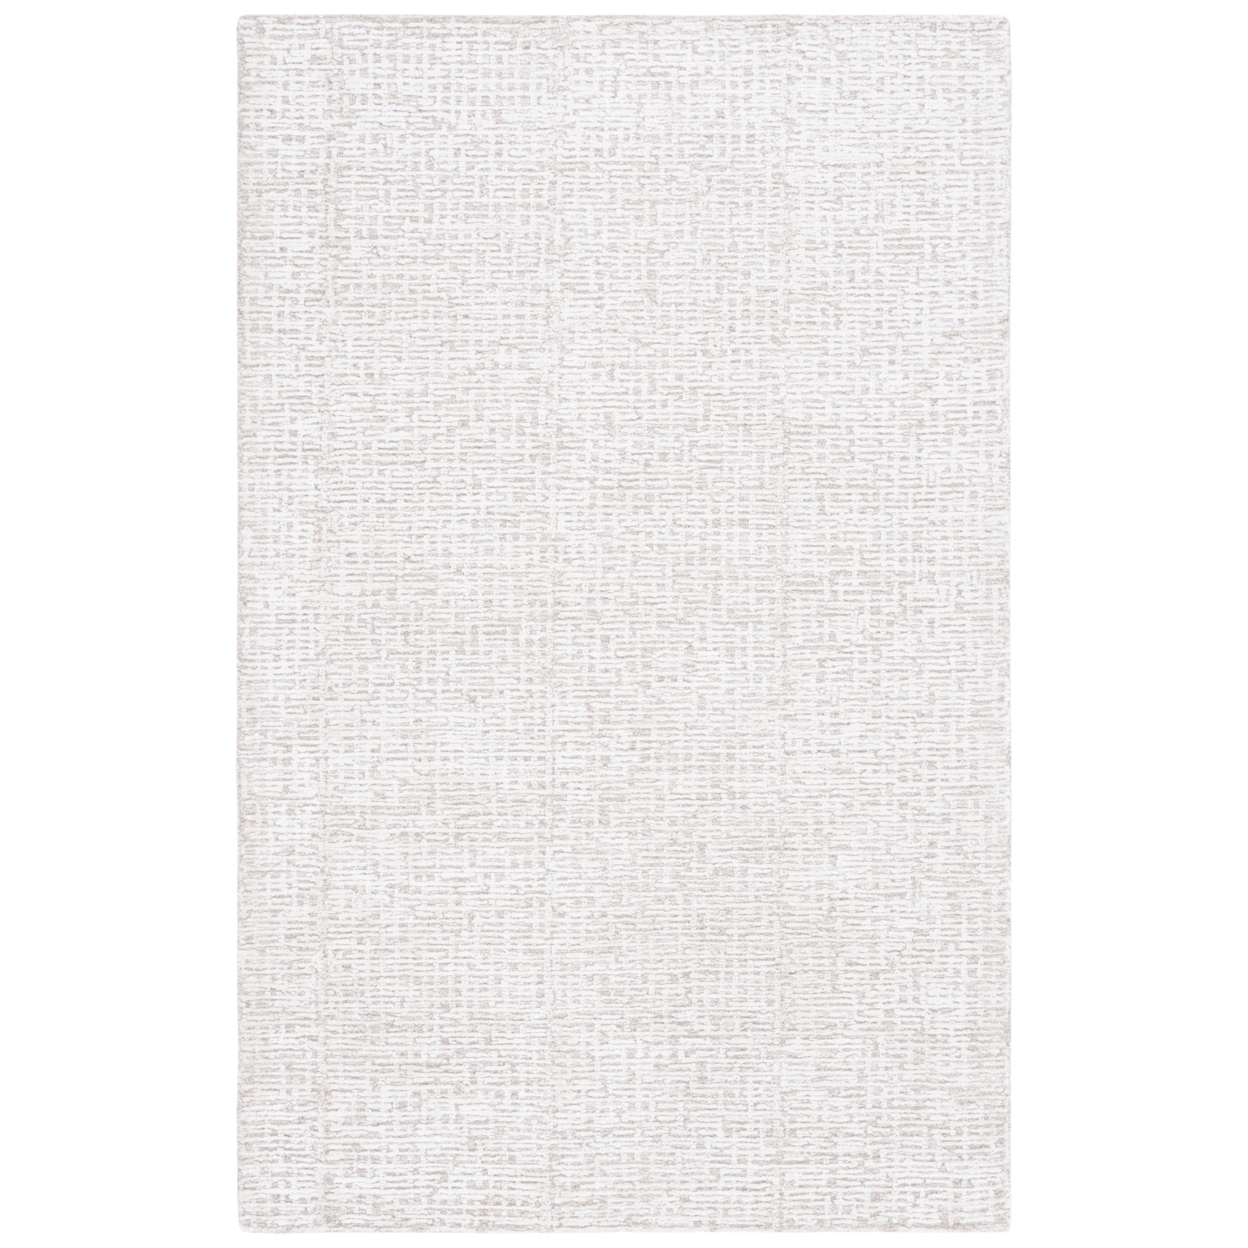 Safavieh GLM601A Glamour Natural / Ivory - Ivory / Black, 6' X 6' Square